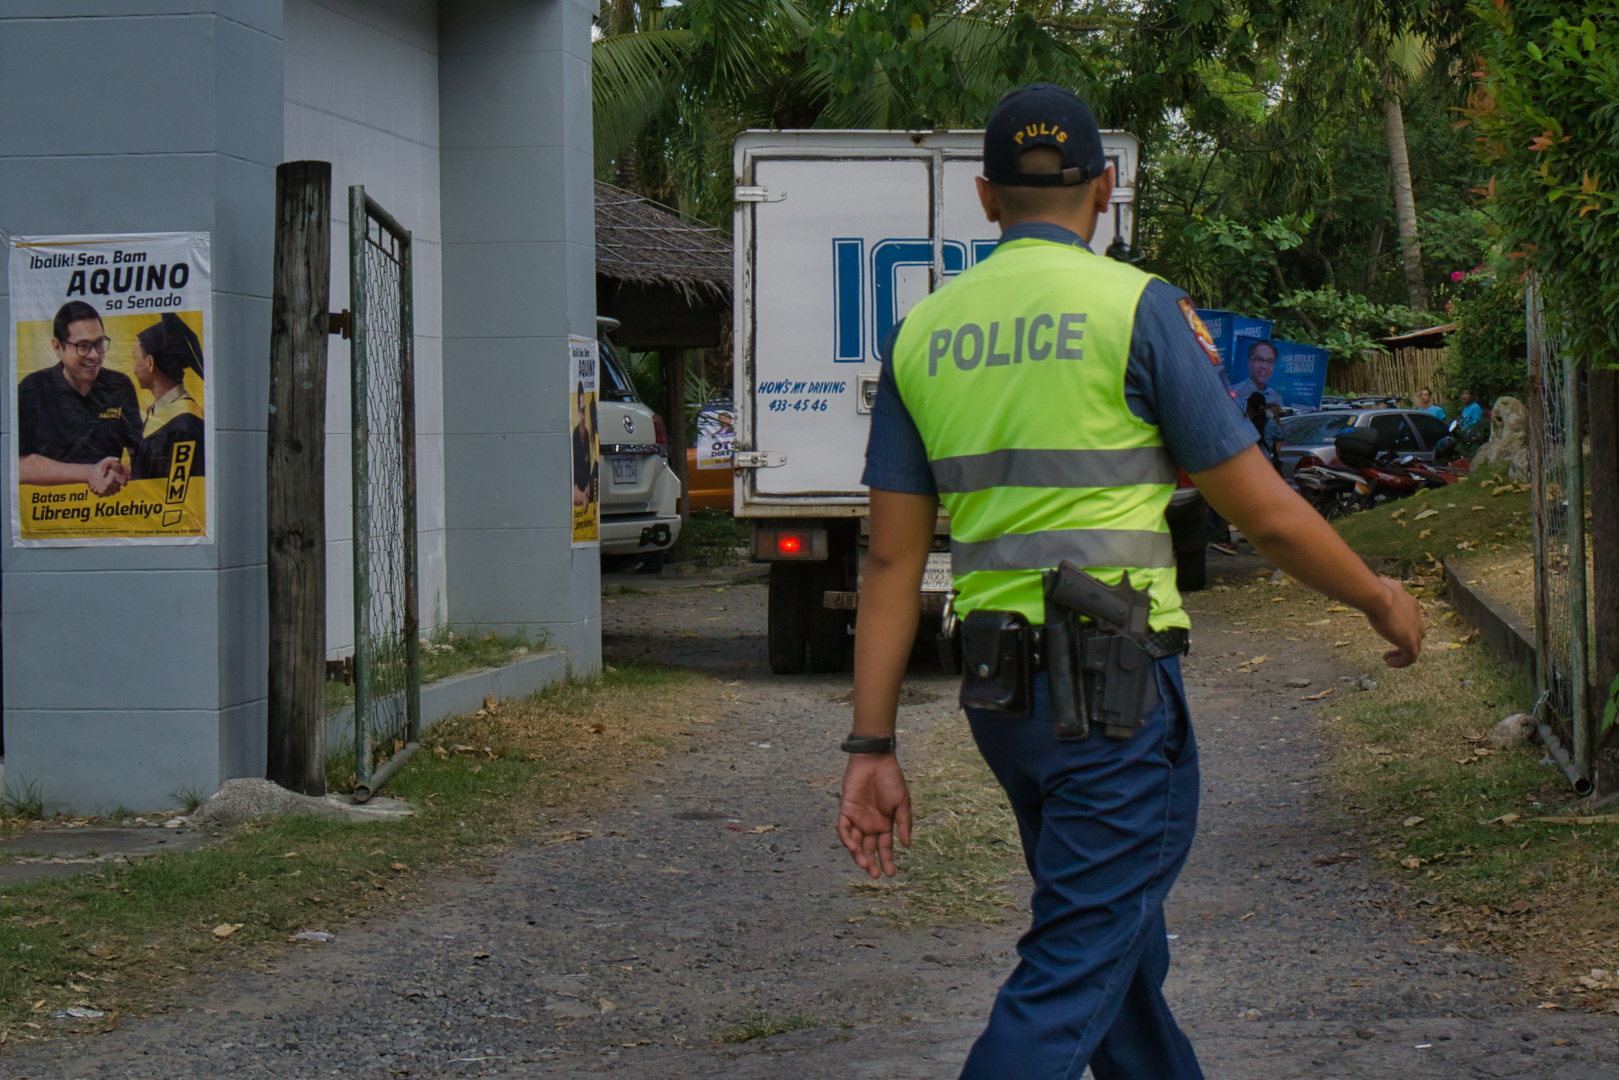 Police officer in the Philippines (photo credit: Brian Evans/flickr)